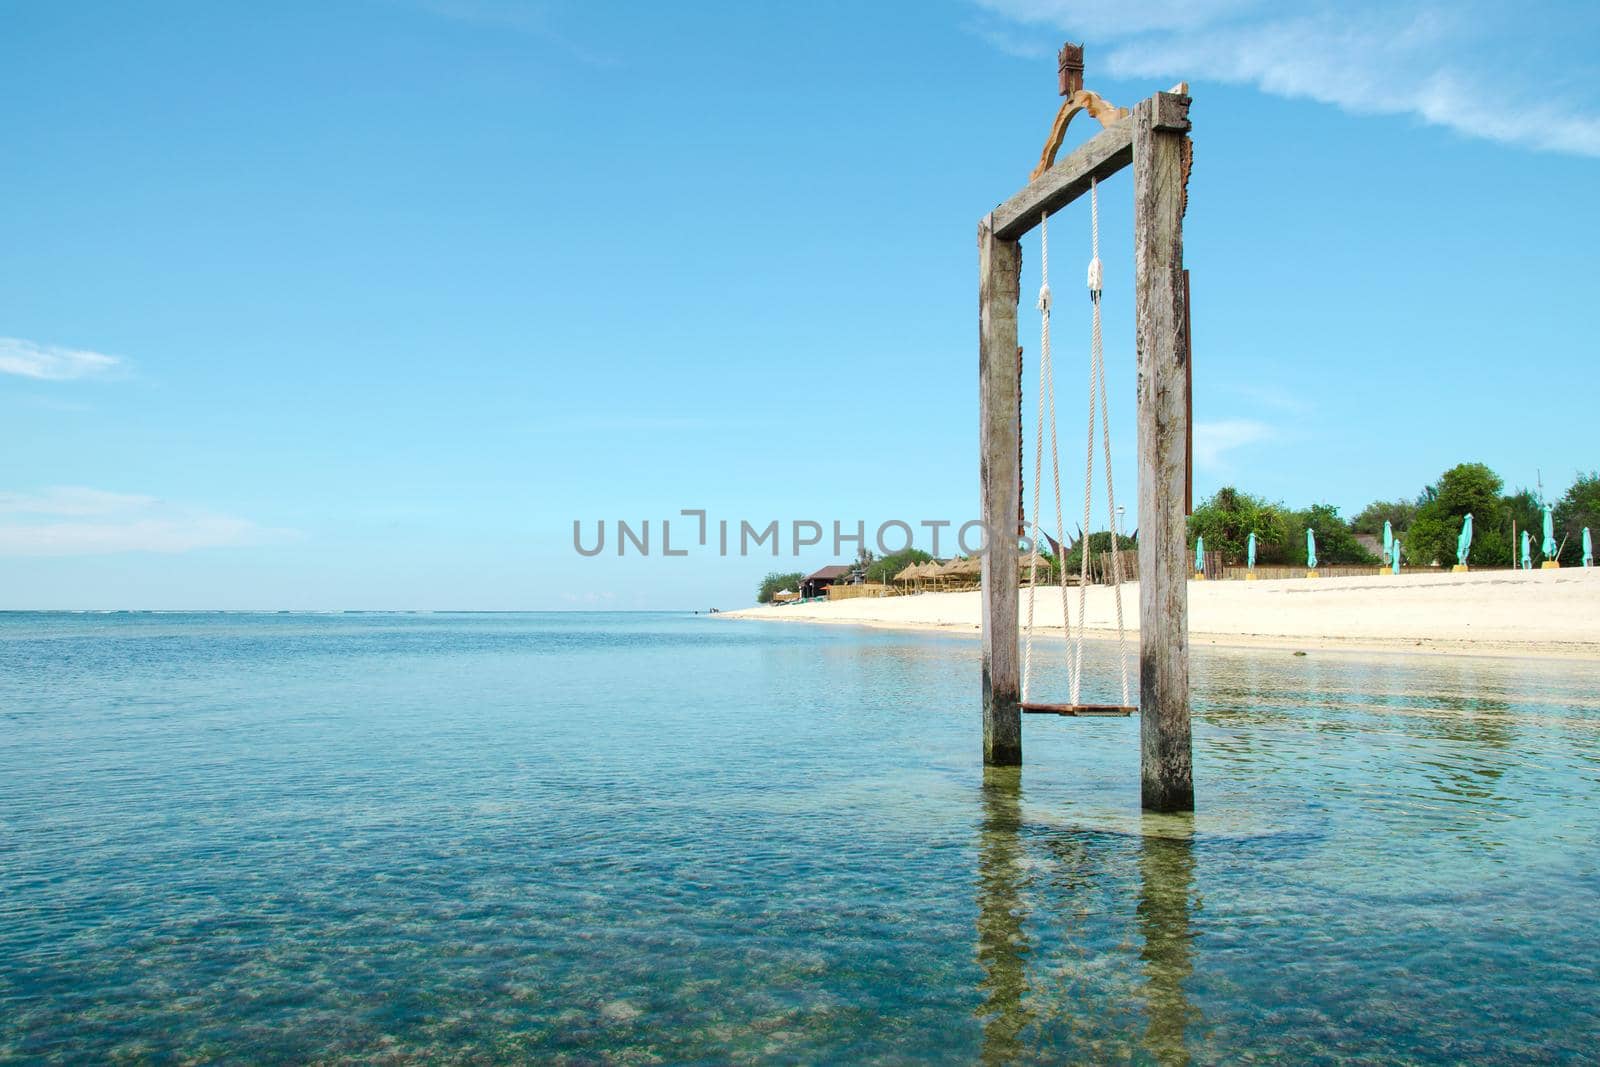 Bali, Indonesia. Exotic beach. Swing located in the ocean near the island of Gili. Stock Image